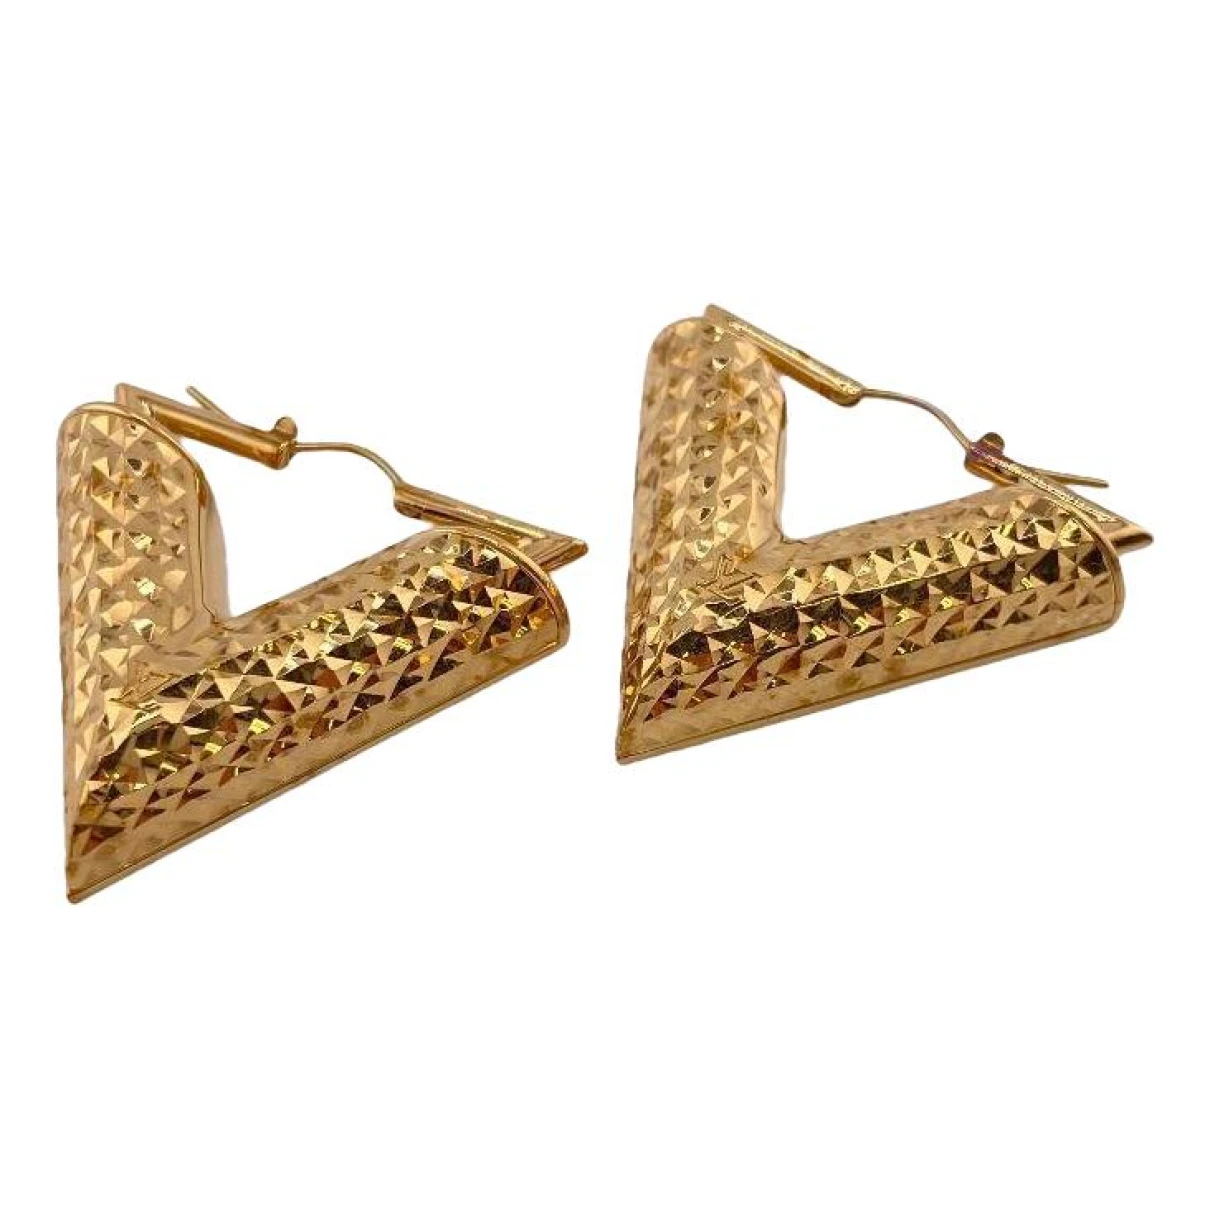 jewellery Louis Vuitton earrings Essential V for Female Metal. Used condition